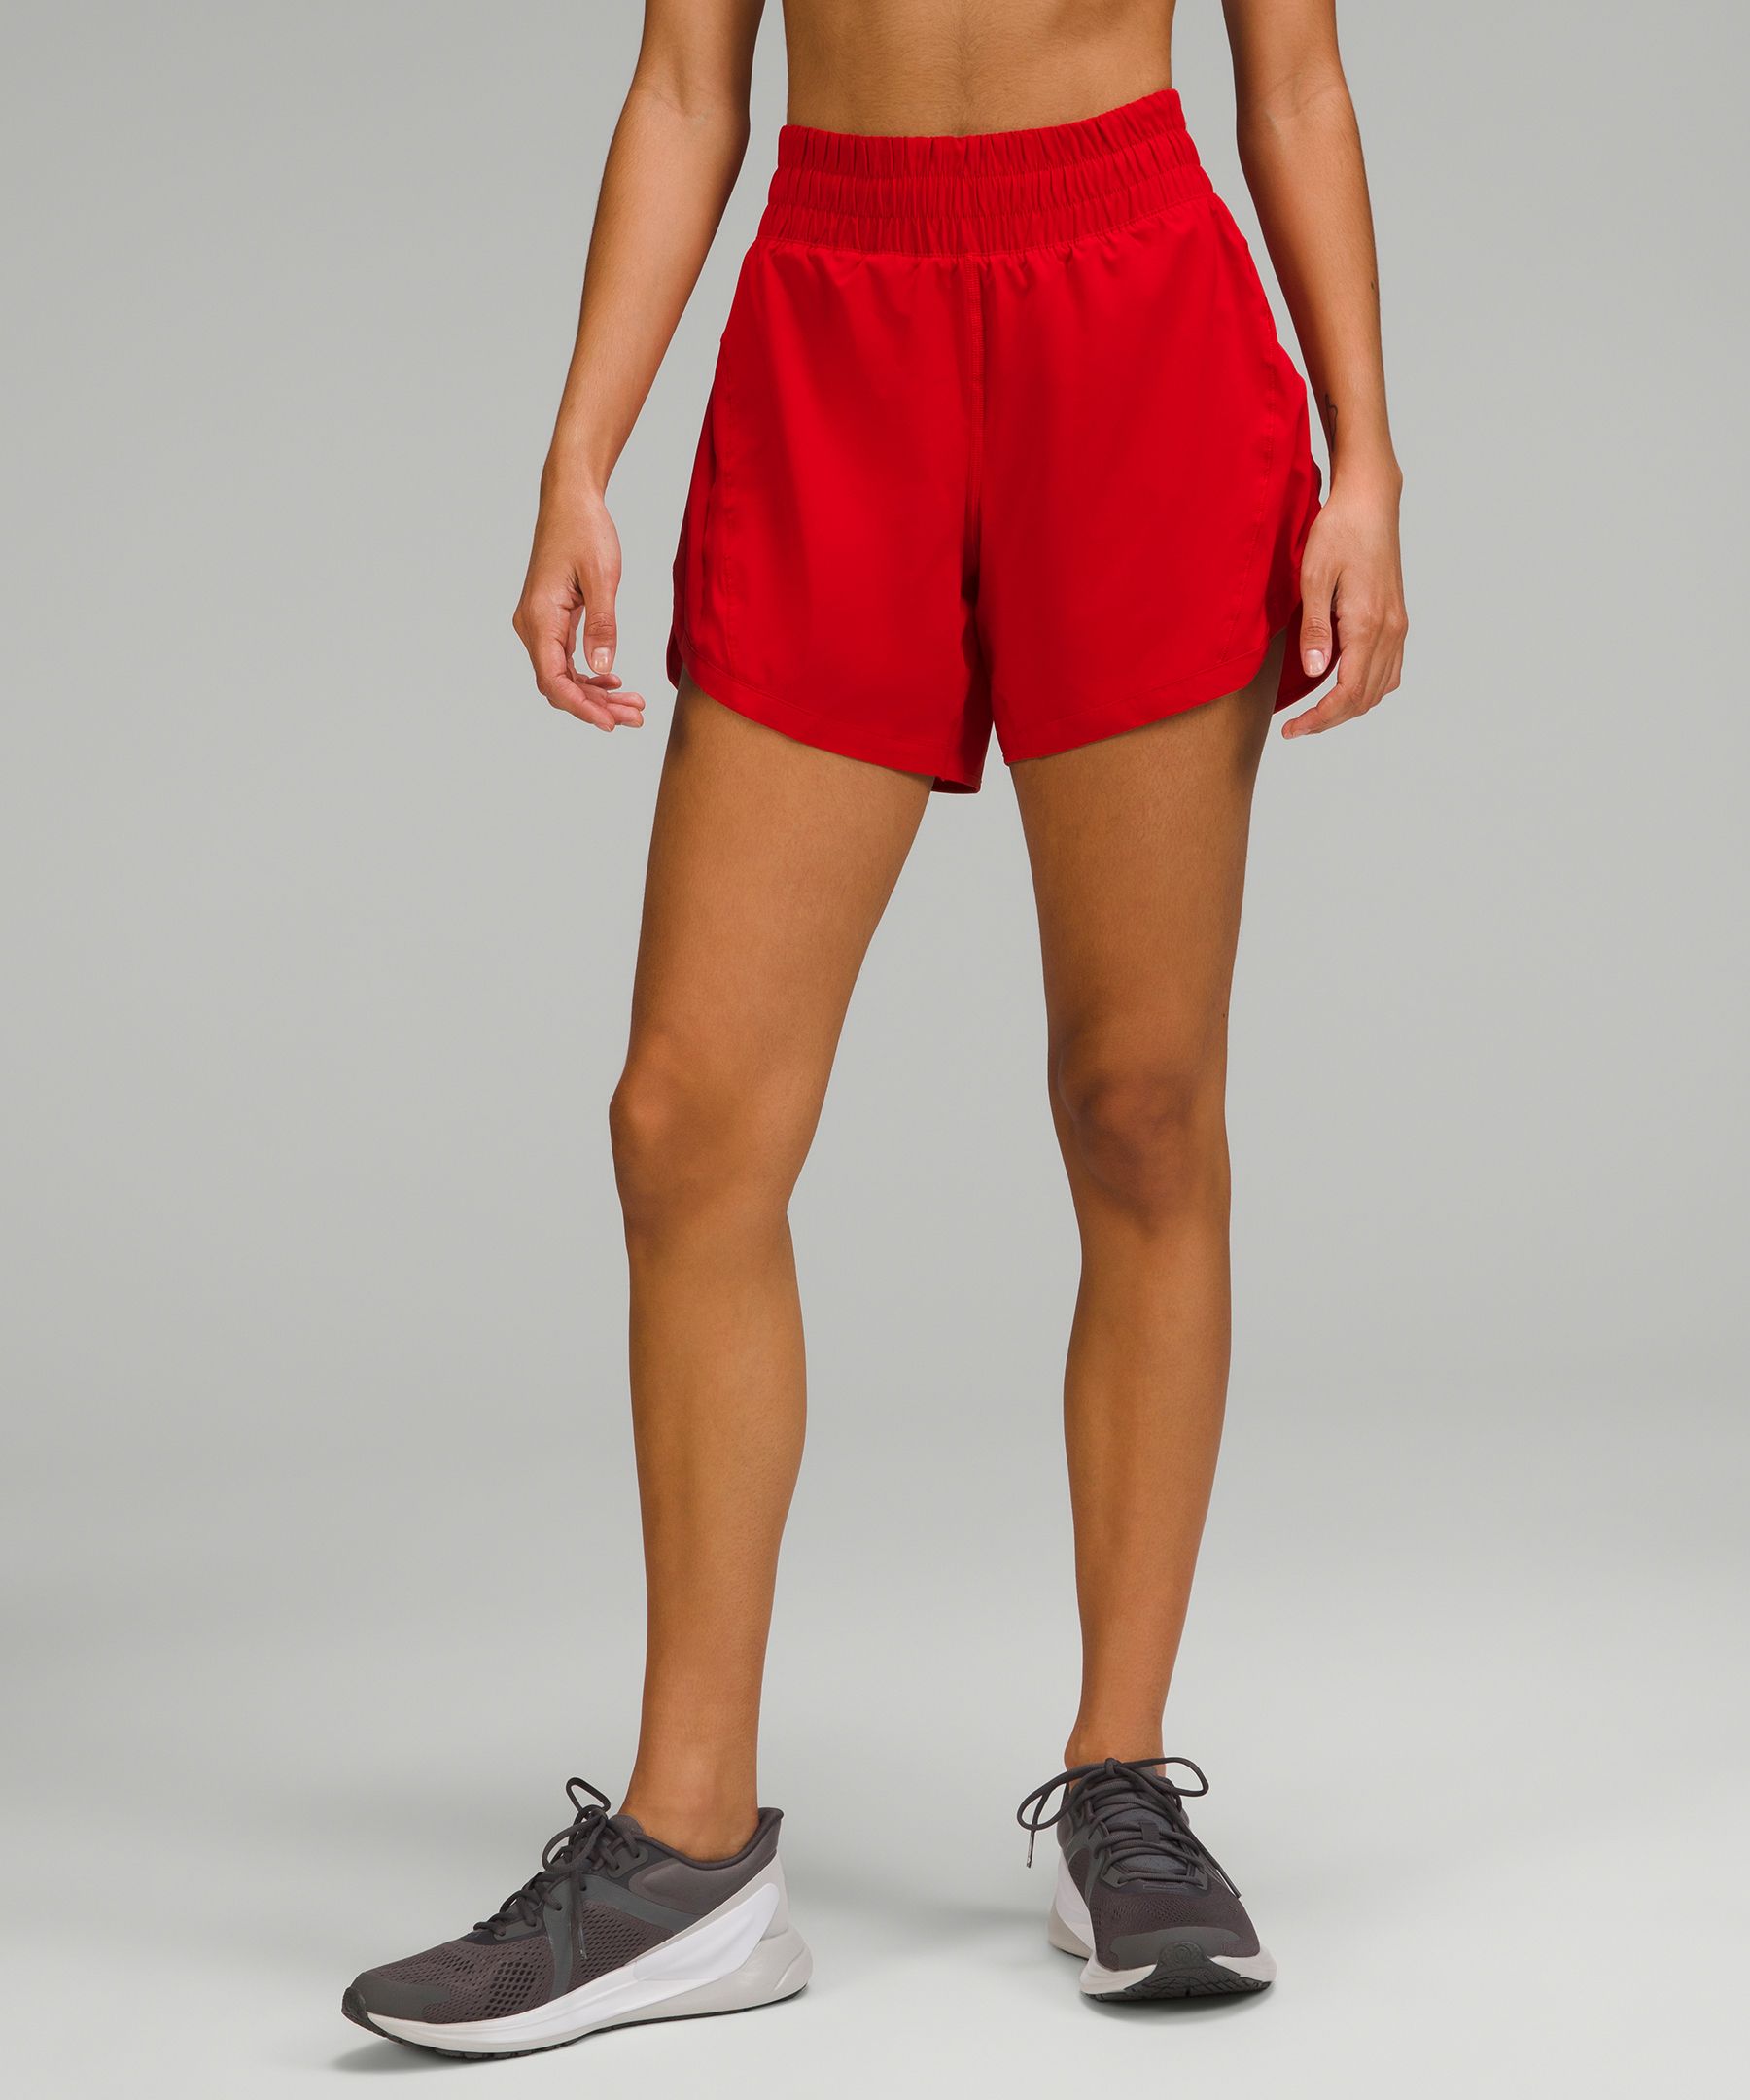 Track That High-Rise Lined Short 5, Women's Shorts